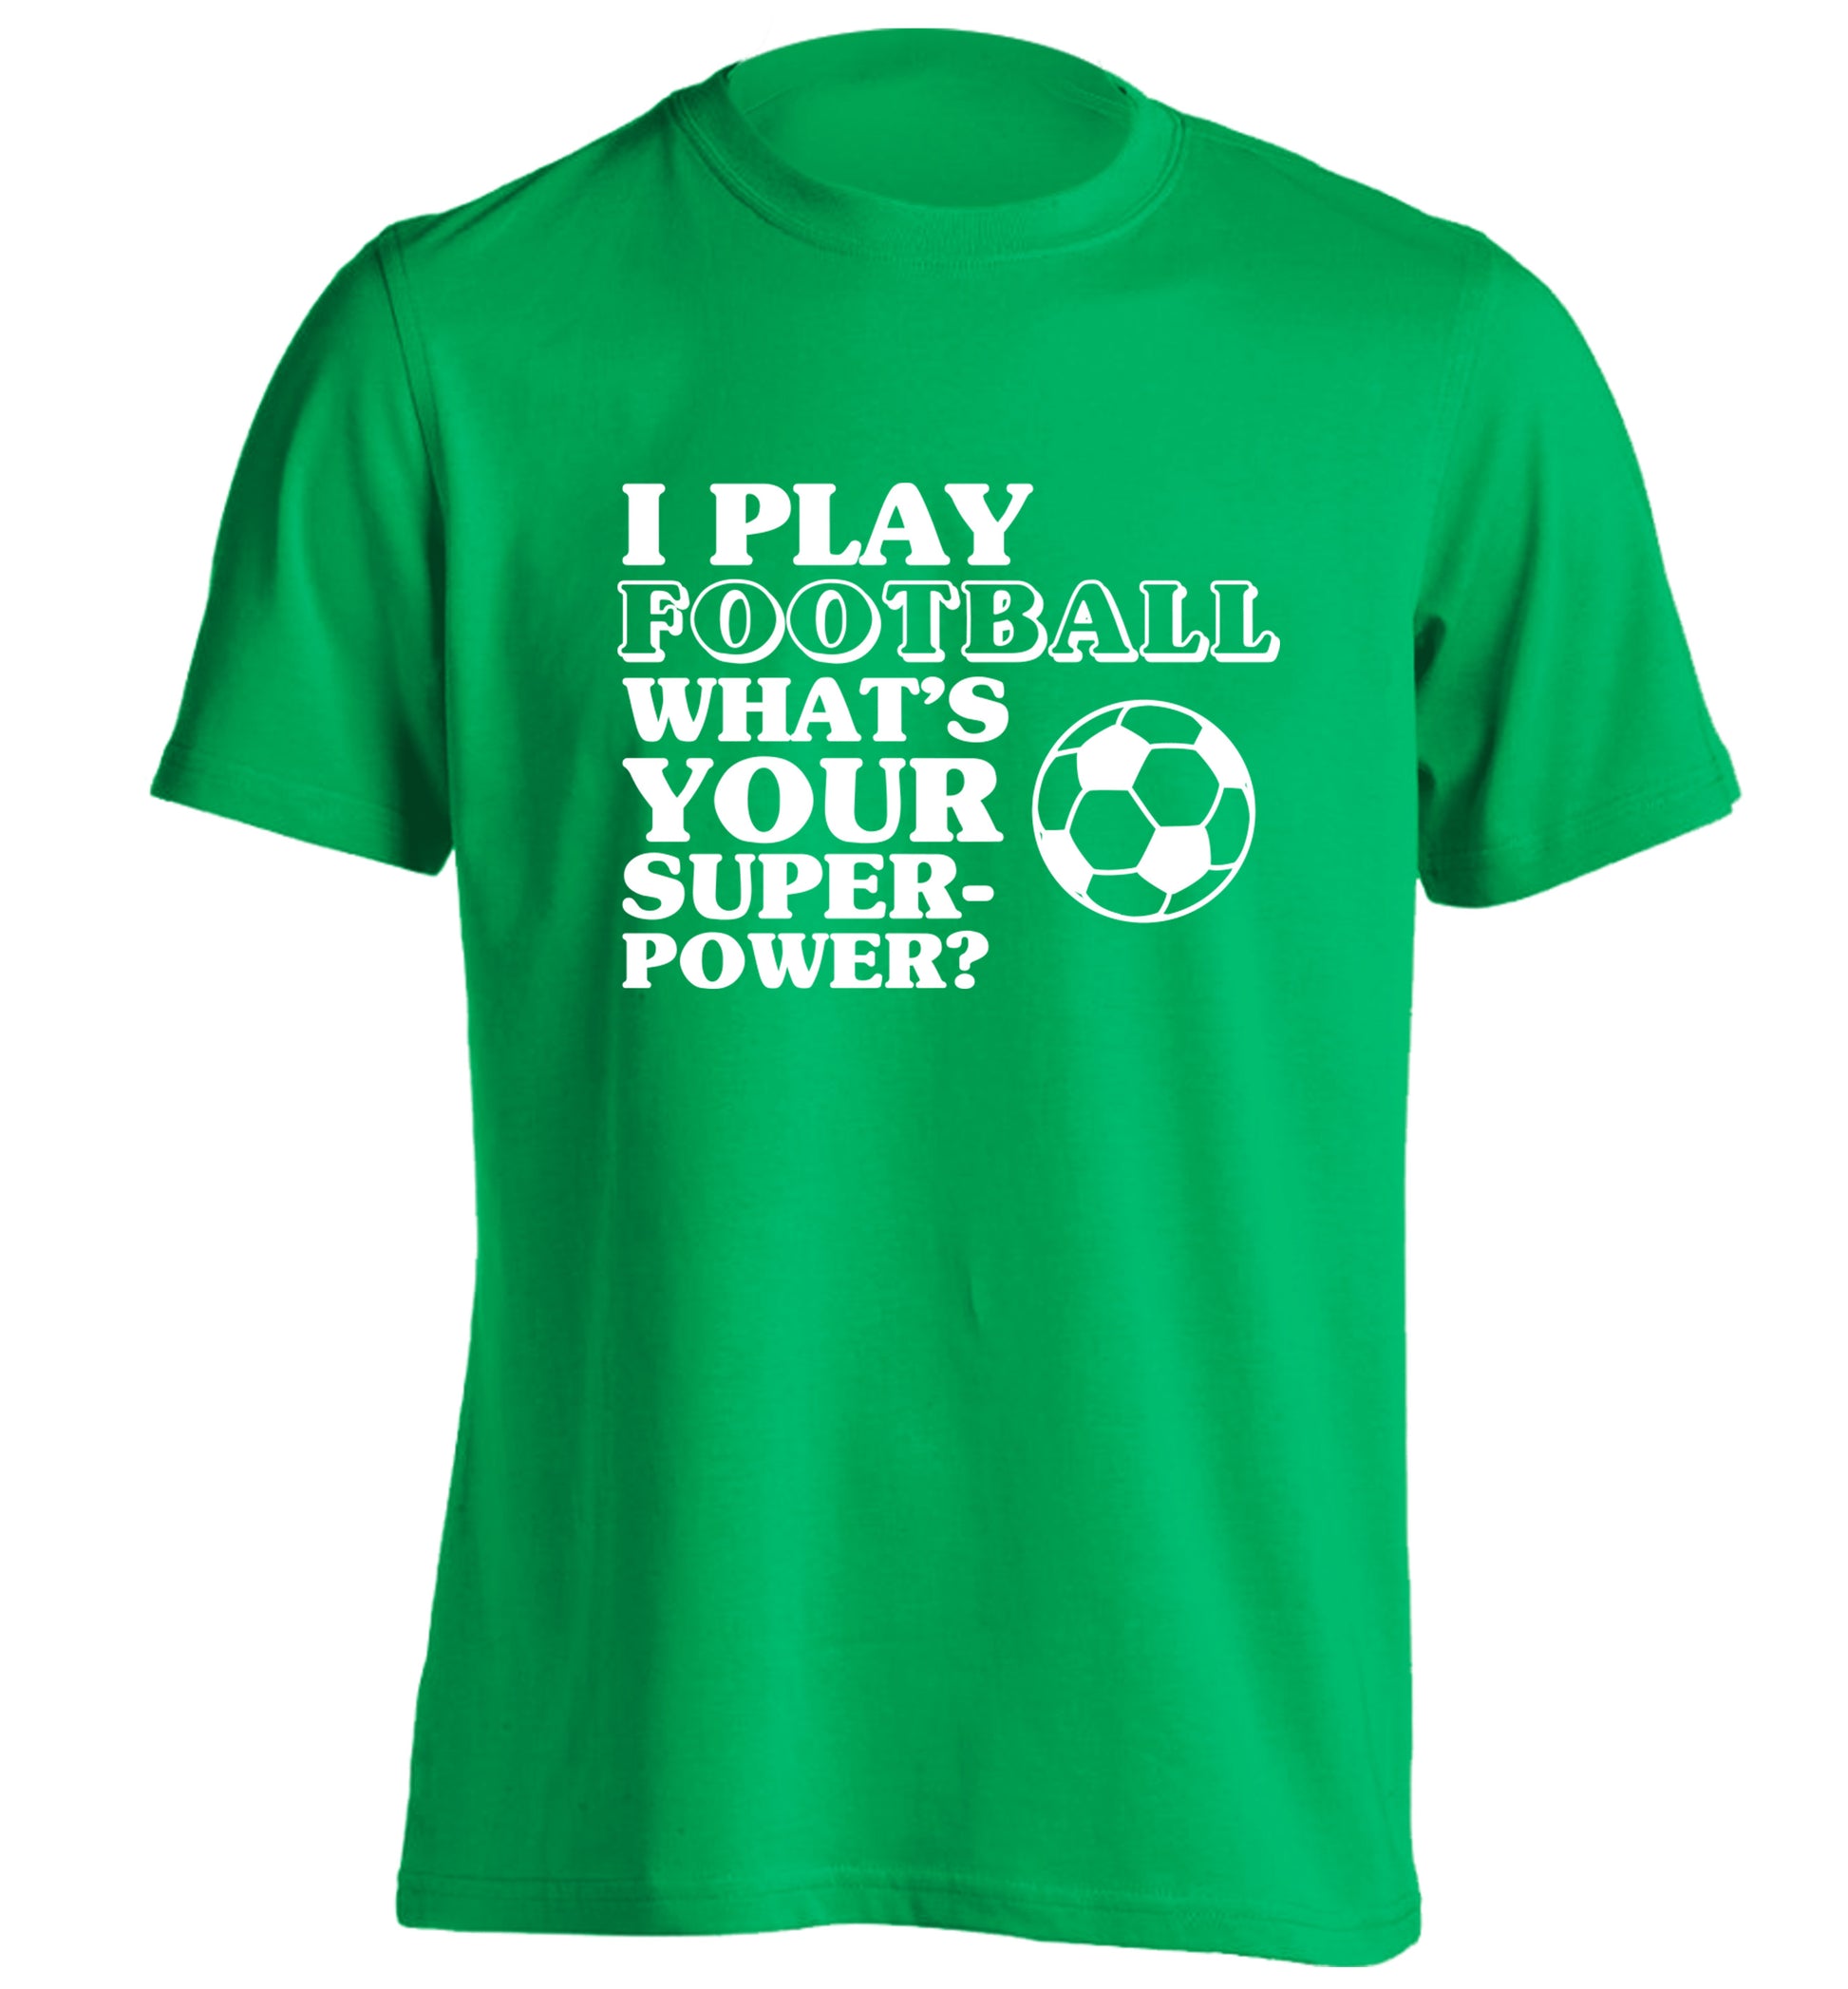 I play football what's your superpower? adults unisexgreen Tshirt 2XL